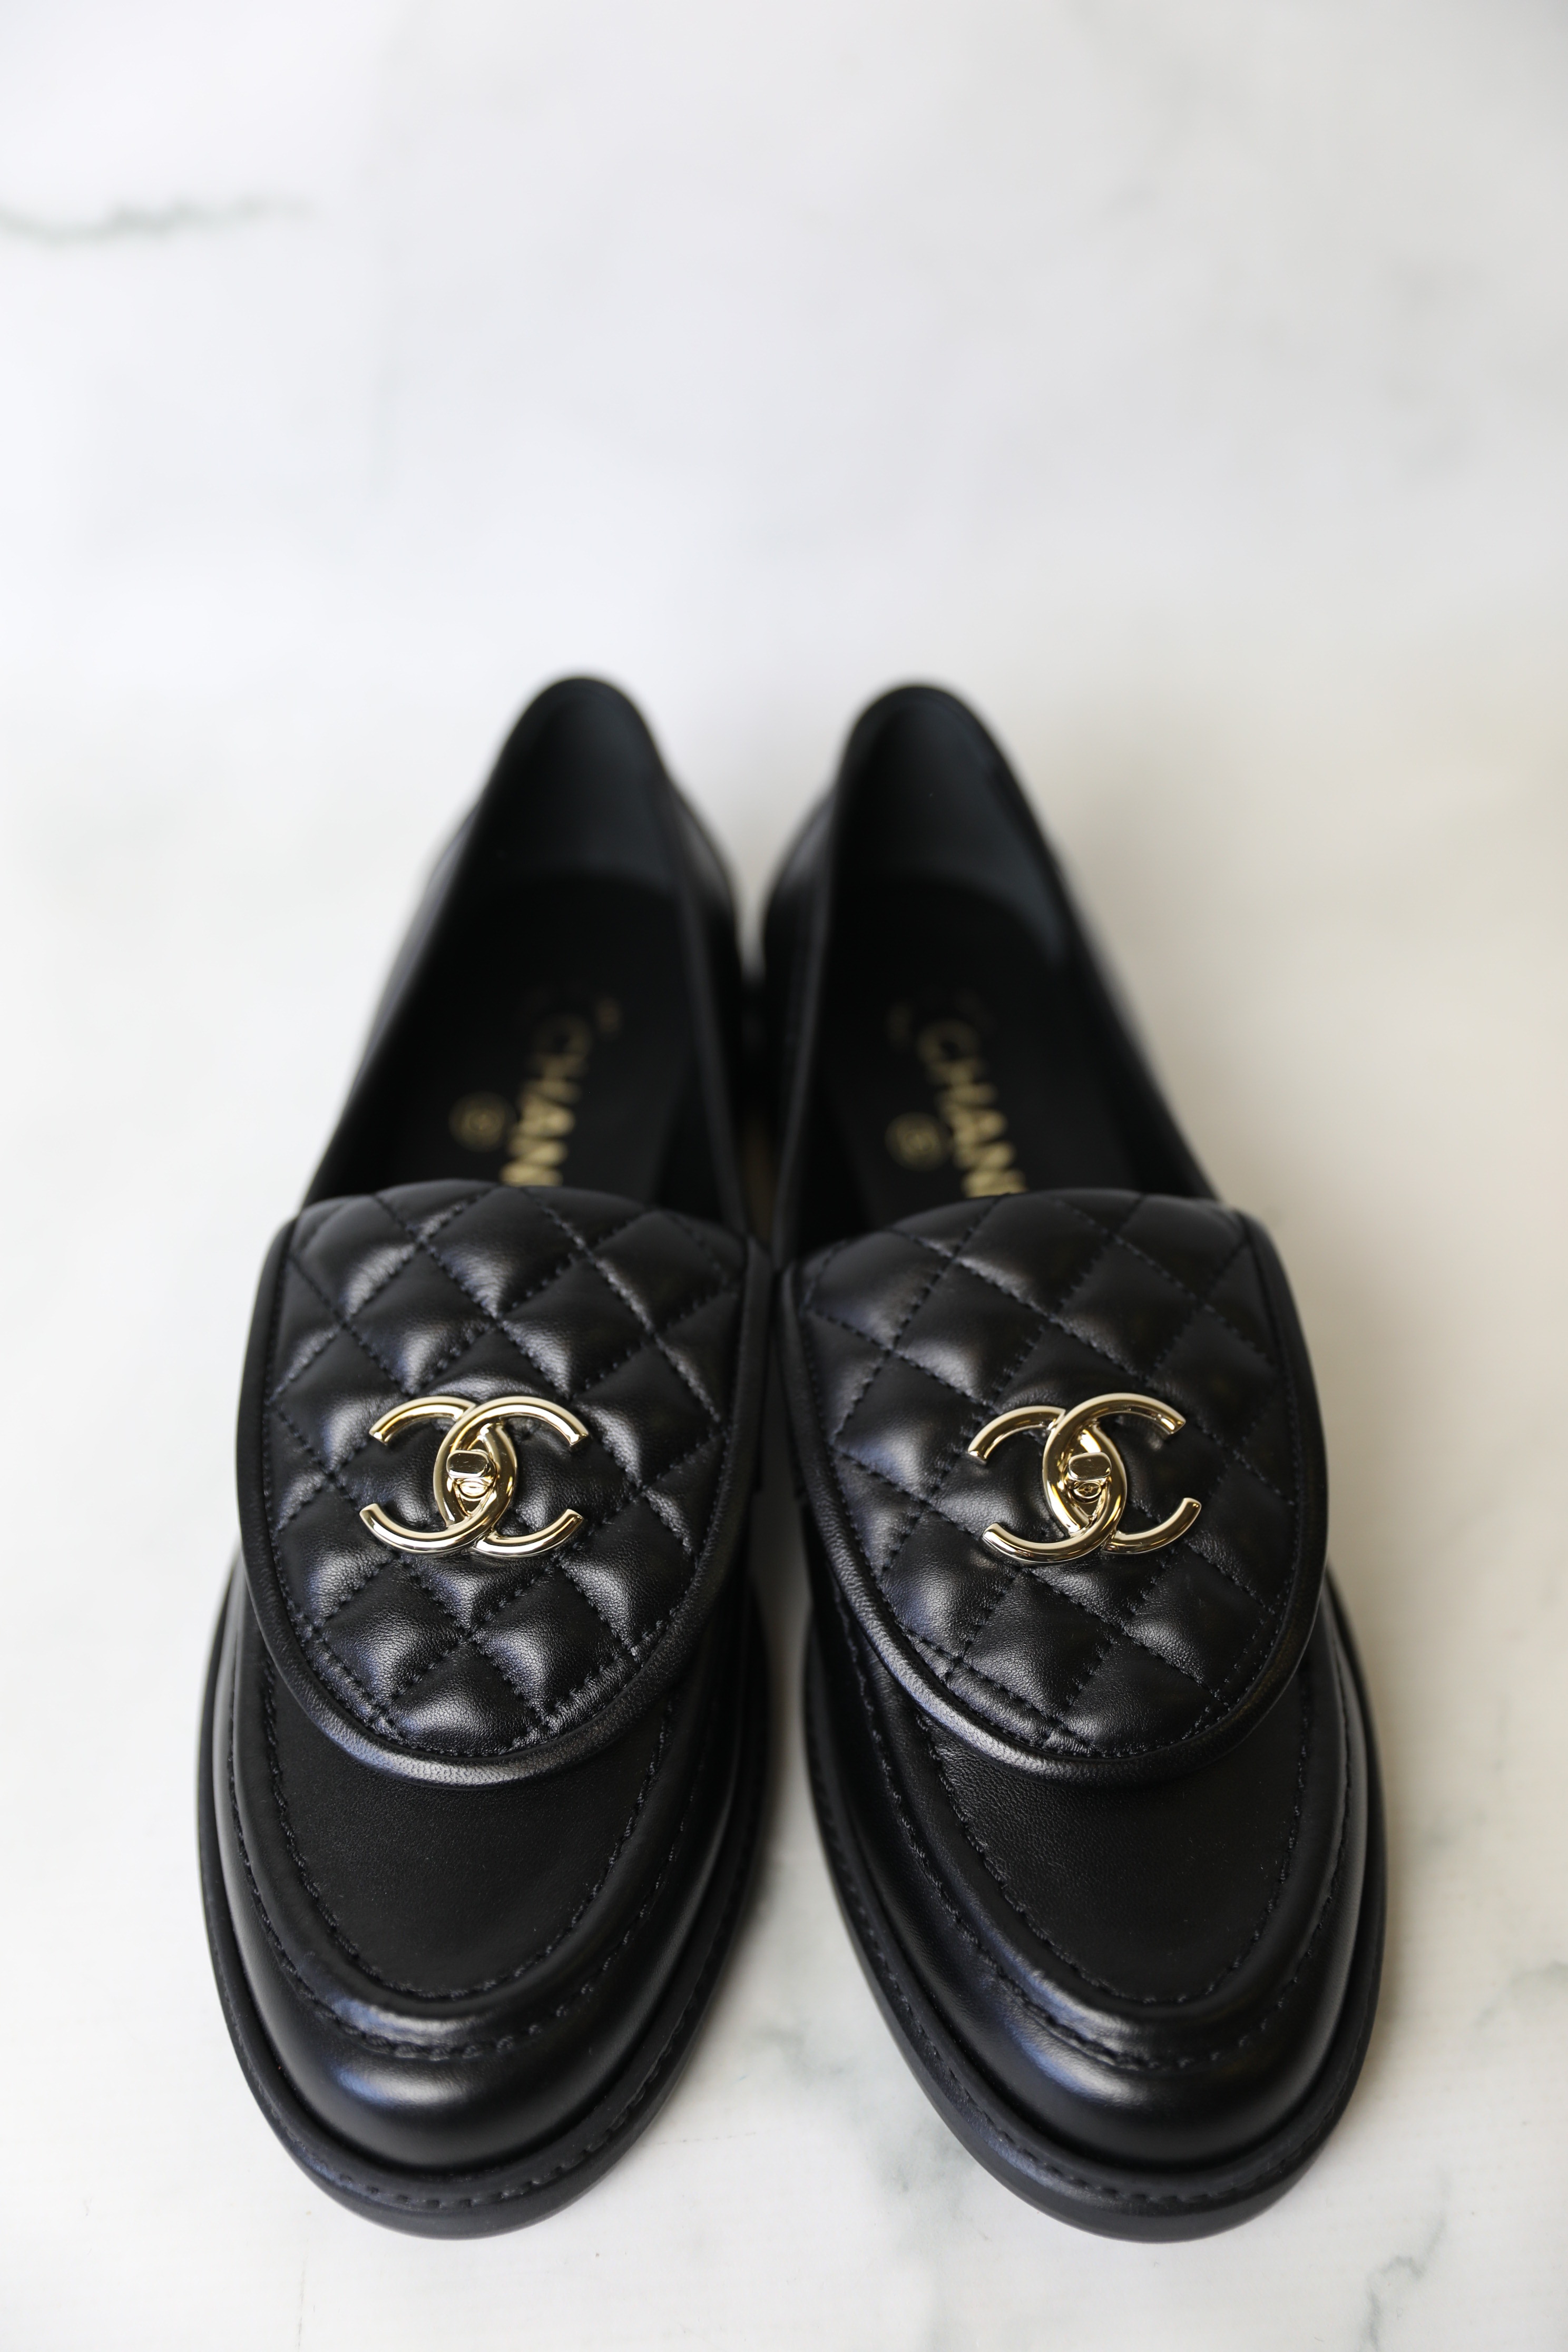 Chanel CC Turnlock Loafers Quilted Black Calfskin Gold Hardware Size 4 –  Coco Approved Studio